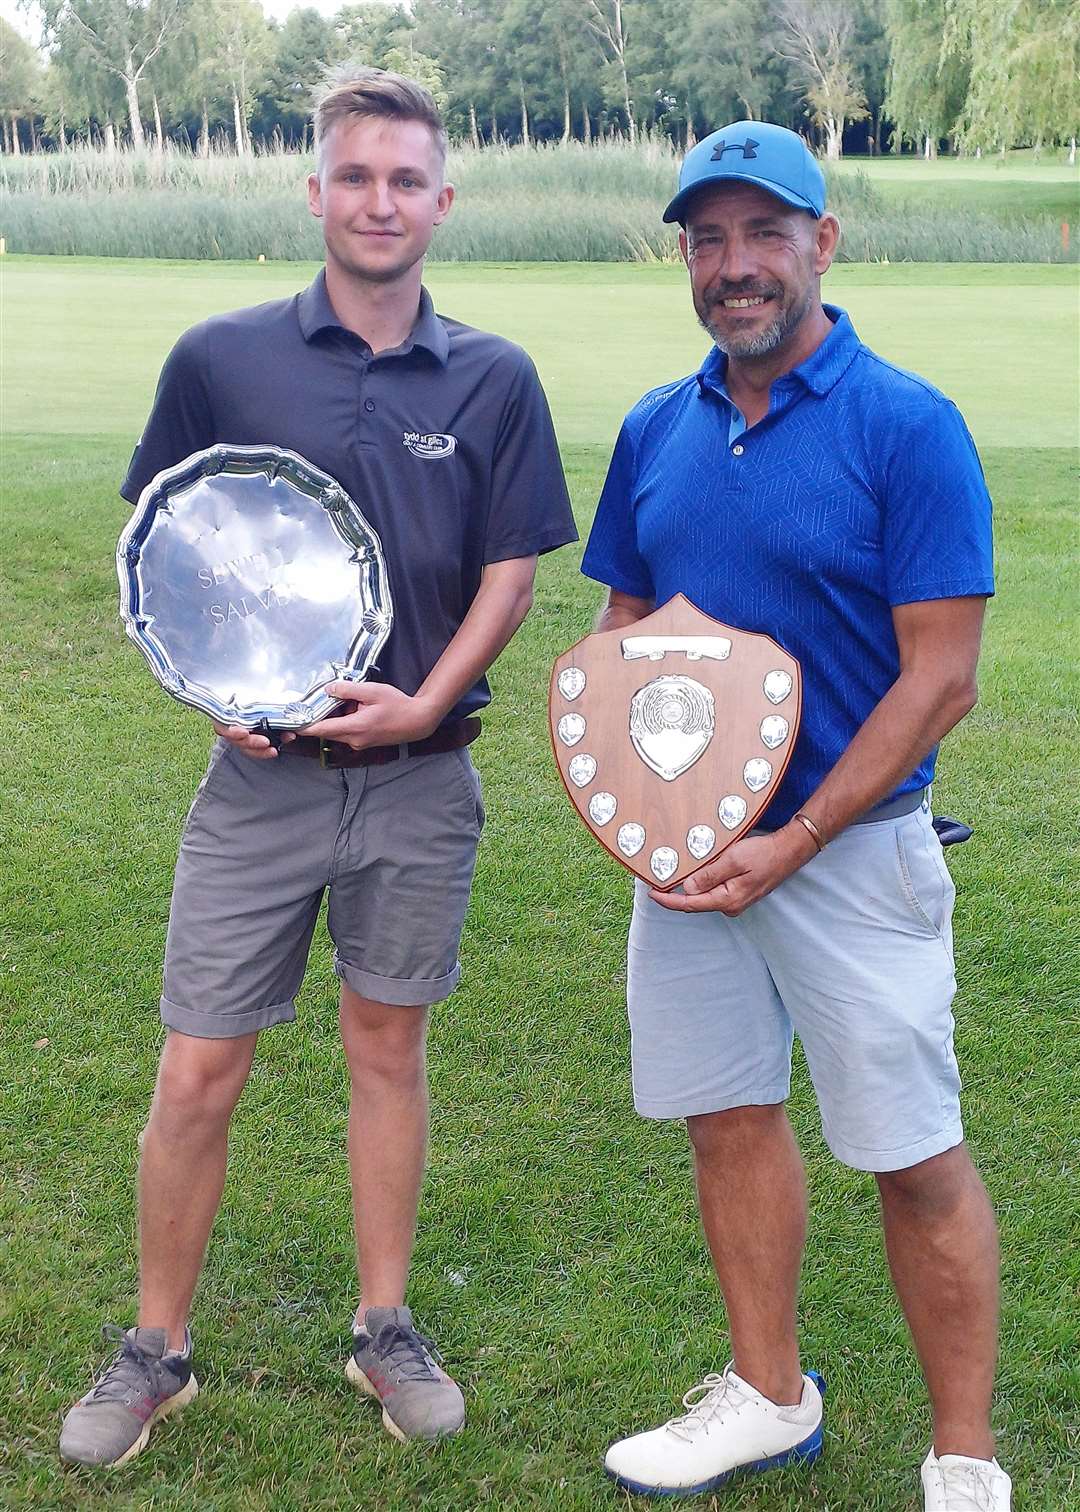 Luke Rowell, the Sewell Salver winner, with James Neve who won the Ciuffini Shield.